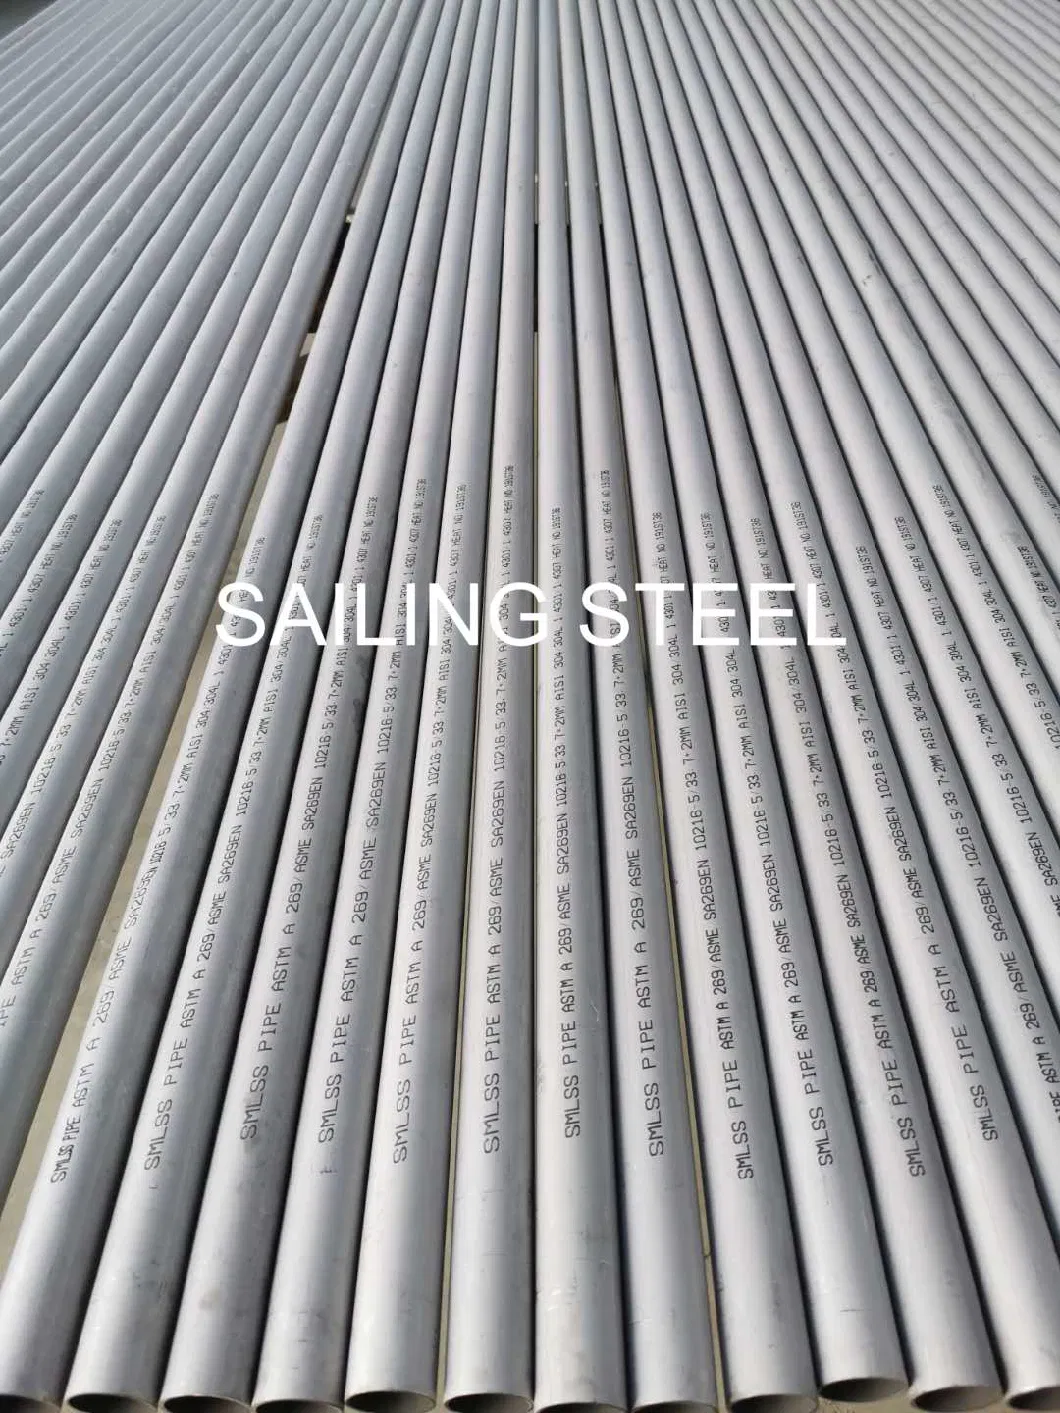 Large Diameter Welded/Seamless Stainless Steel Pipe Nickel-Based Alloy Pipe From Chinese Factory